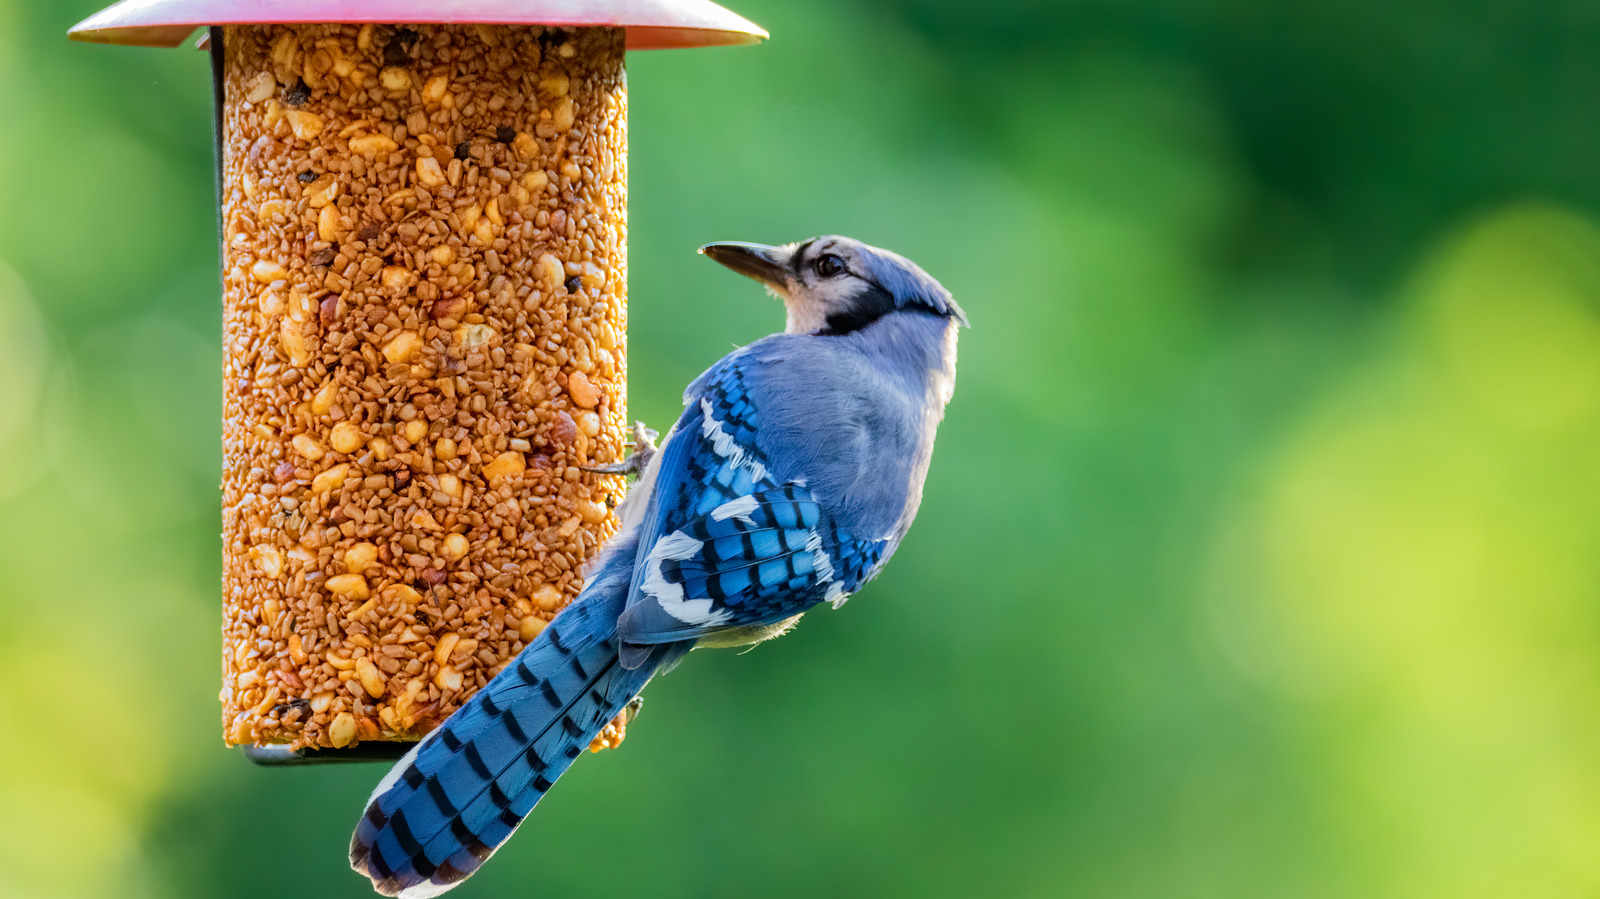 The Busy Blue Jay